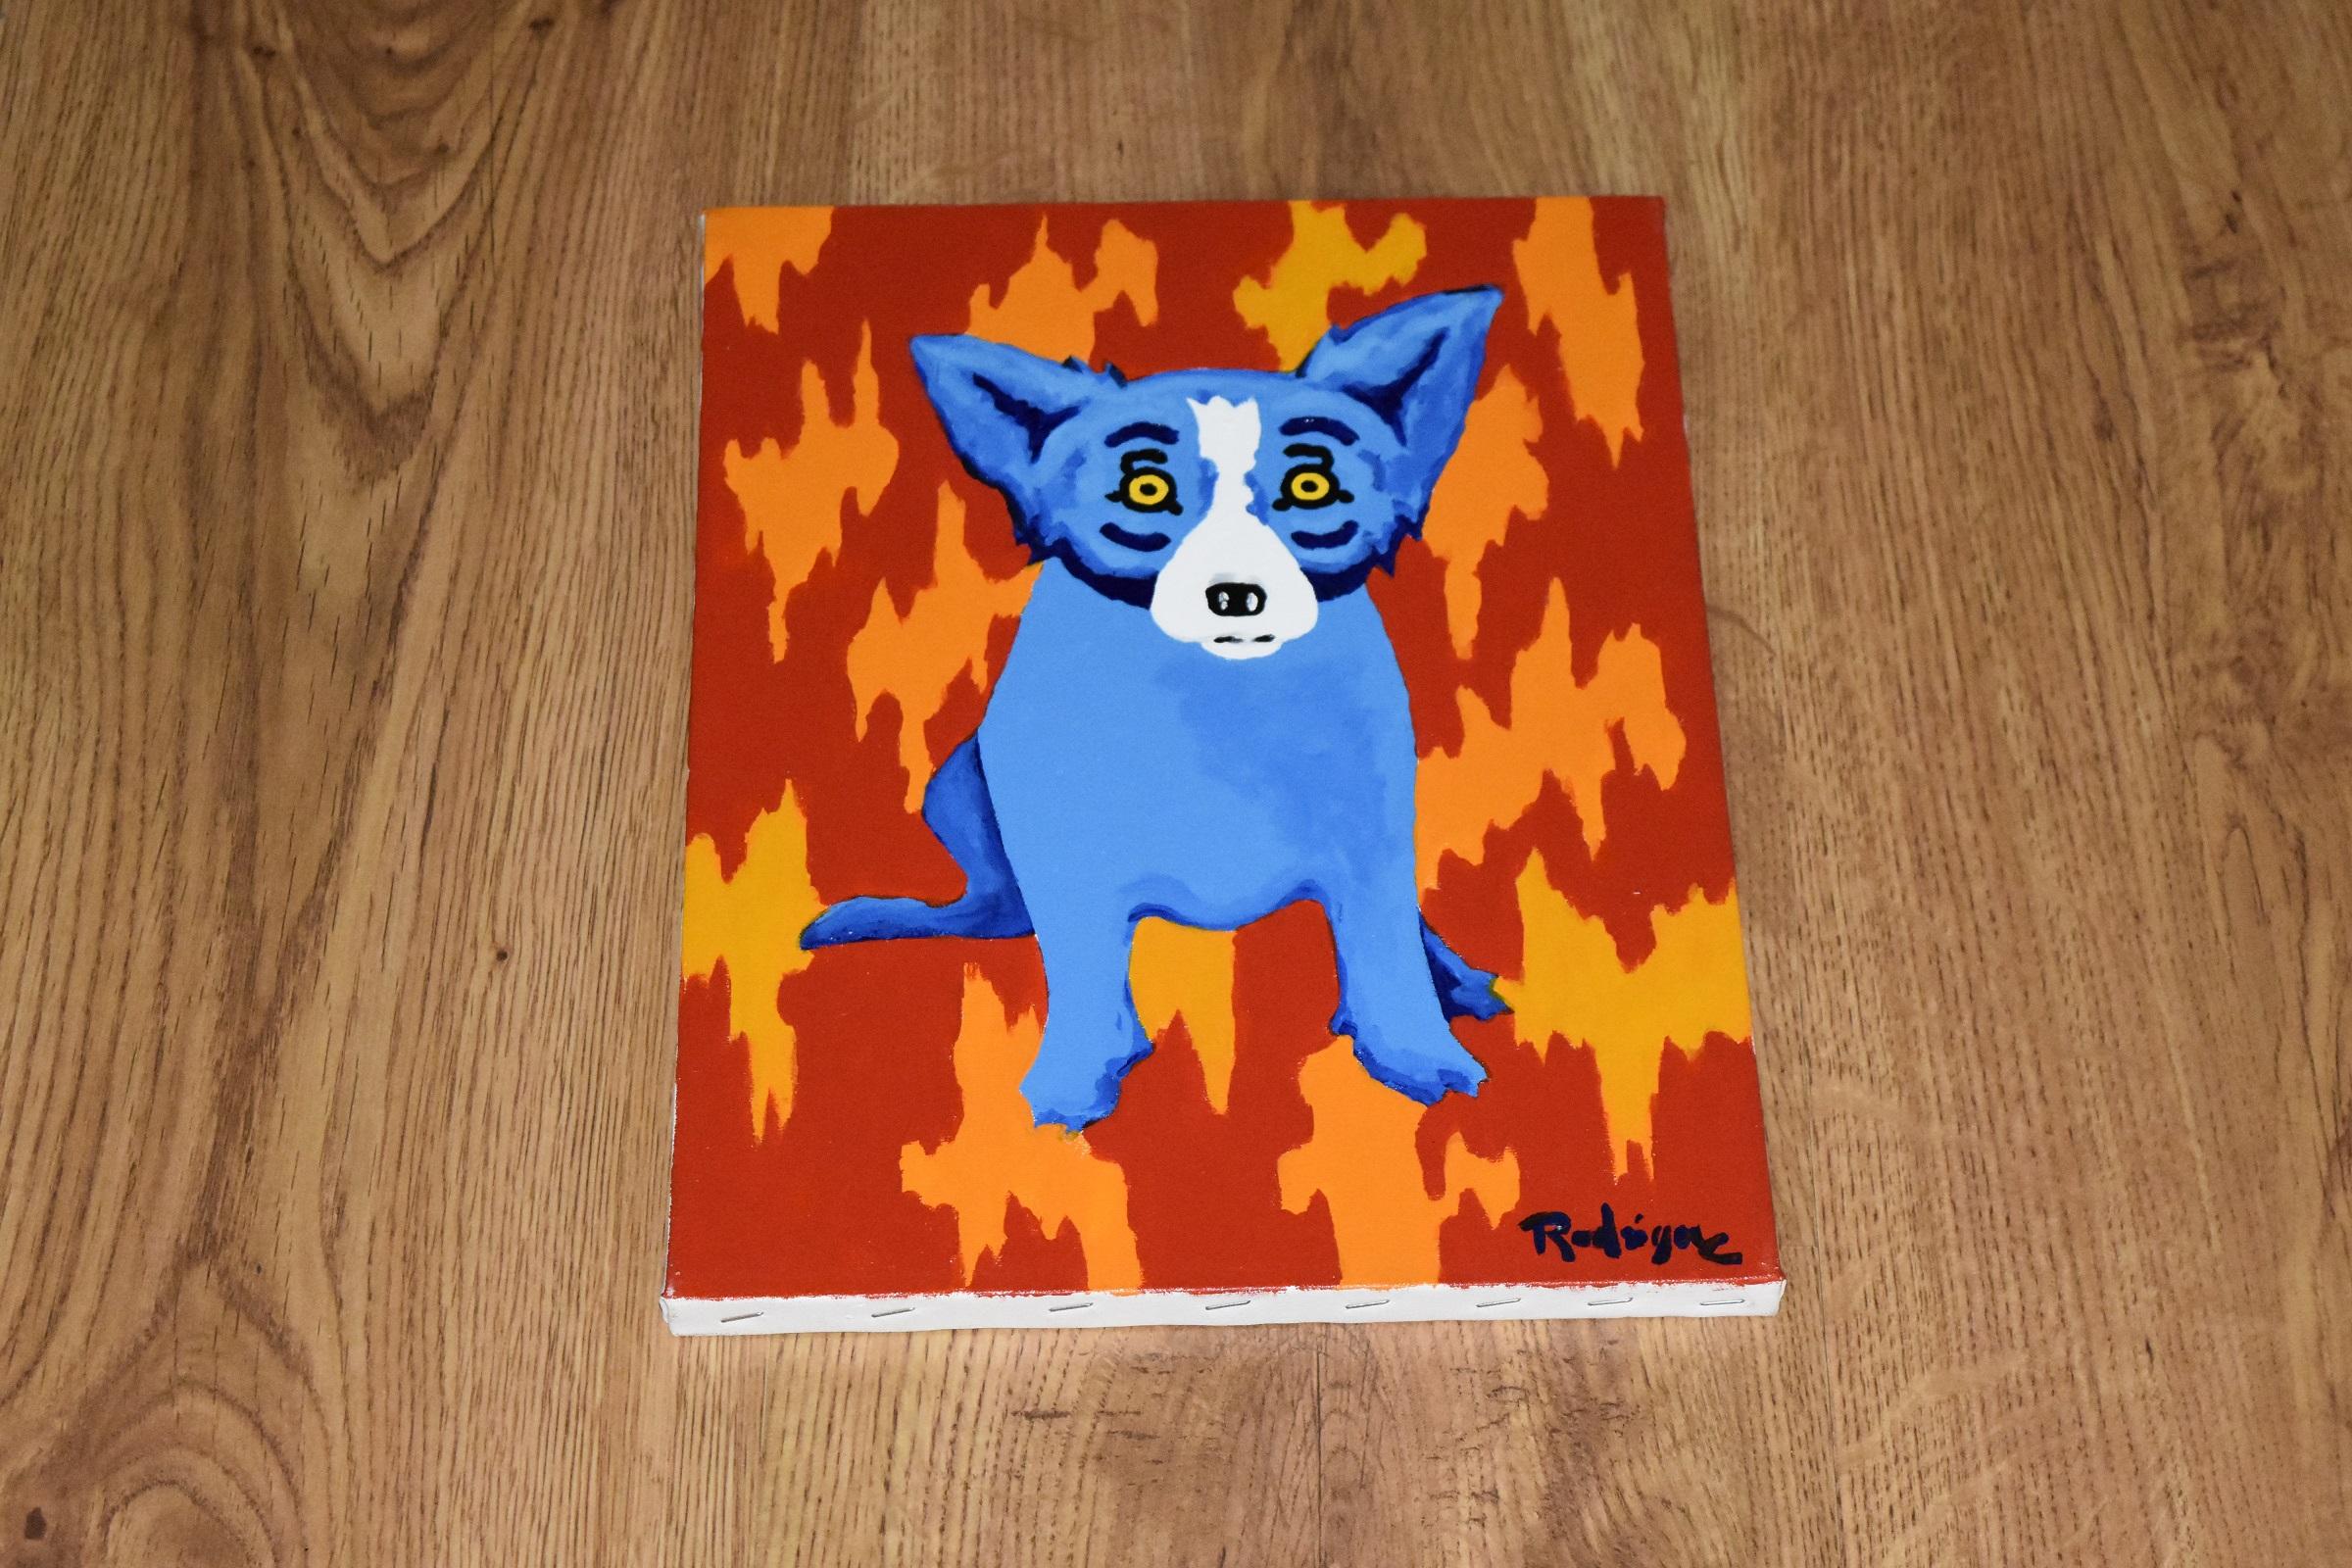 Original - Fire Wall - Signed Acrylic on Canvas - Blue Dog - Painting by George Rodrigue